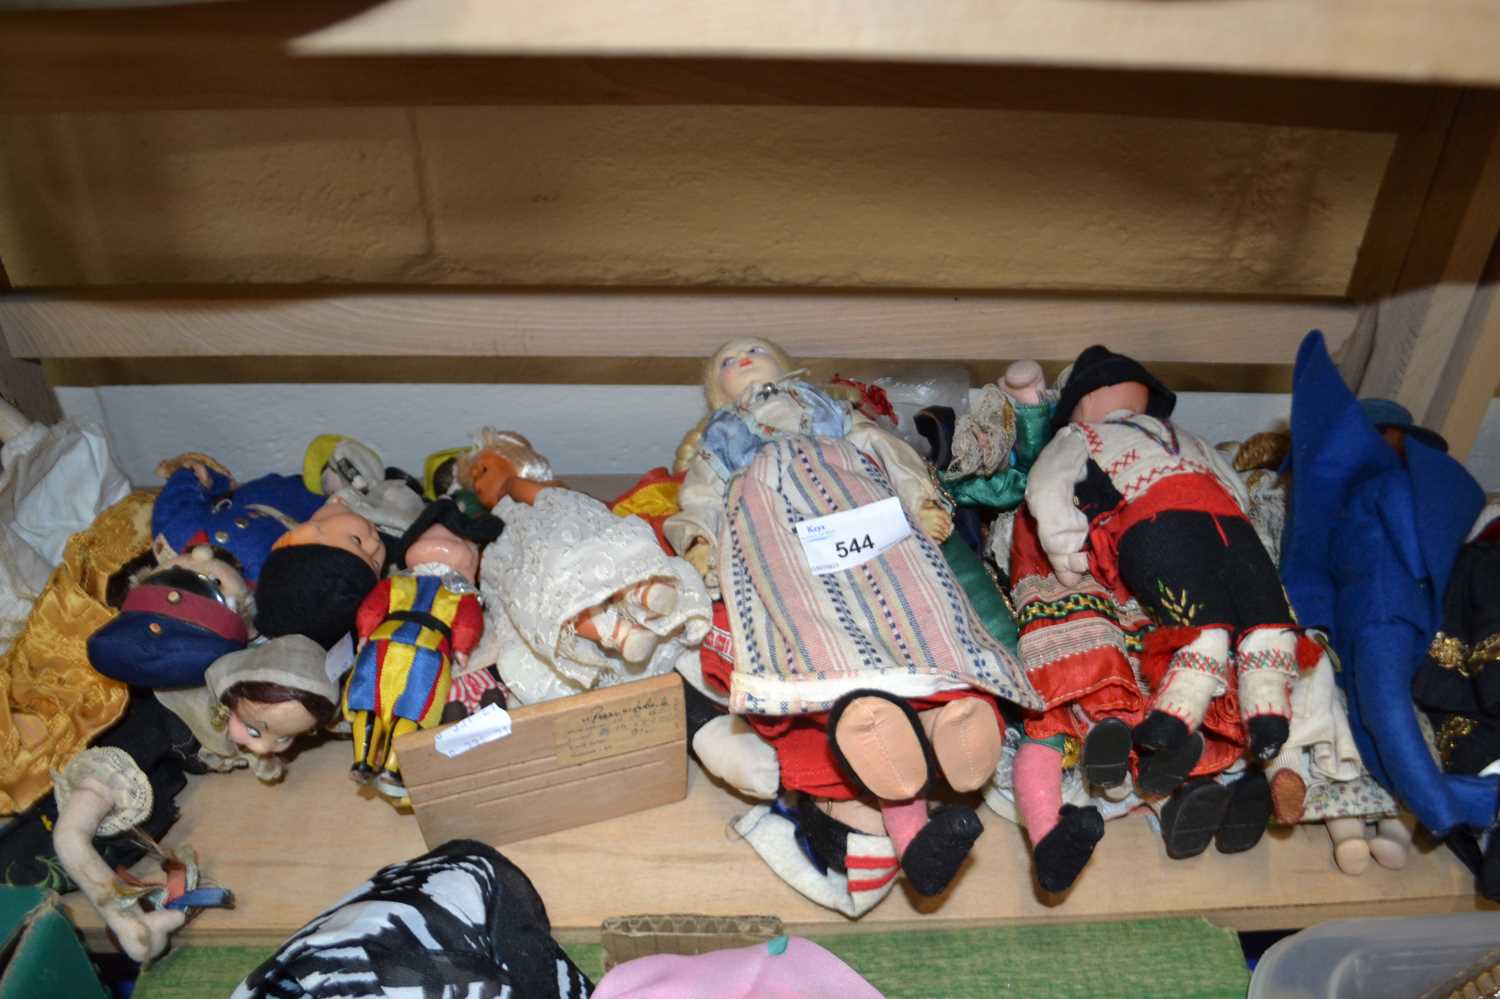 Collection of costumes dolls